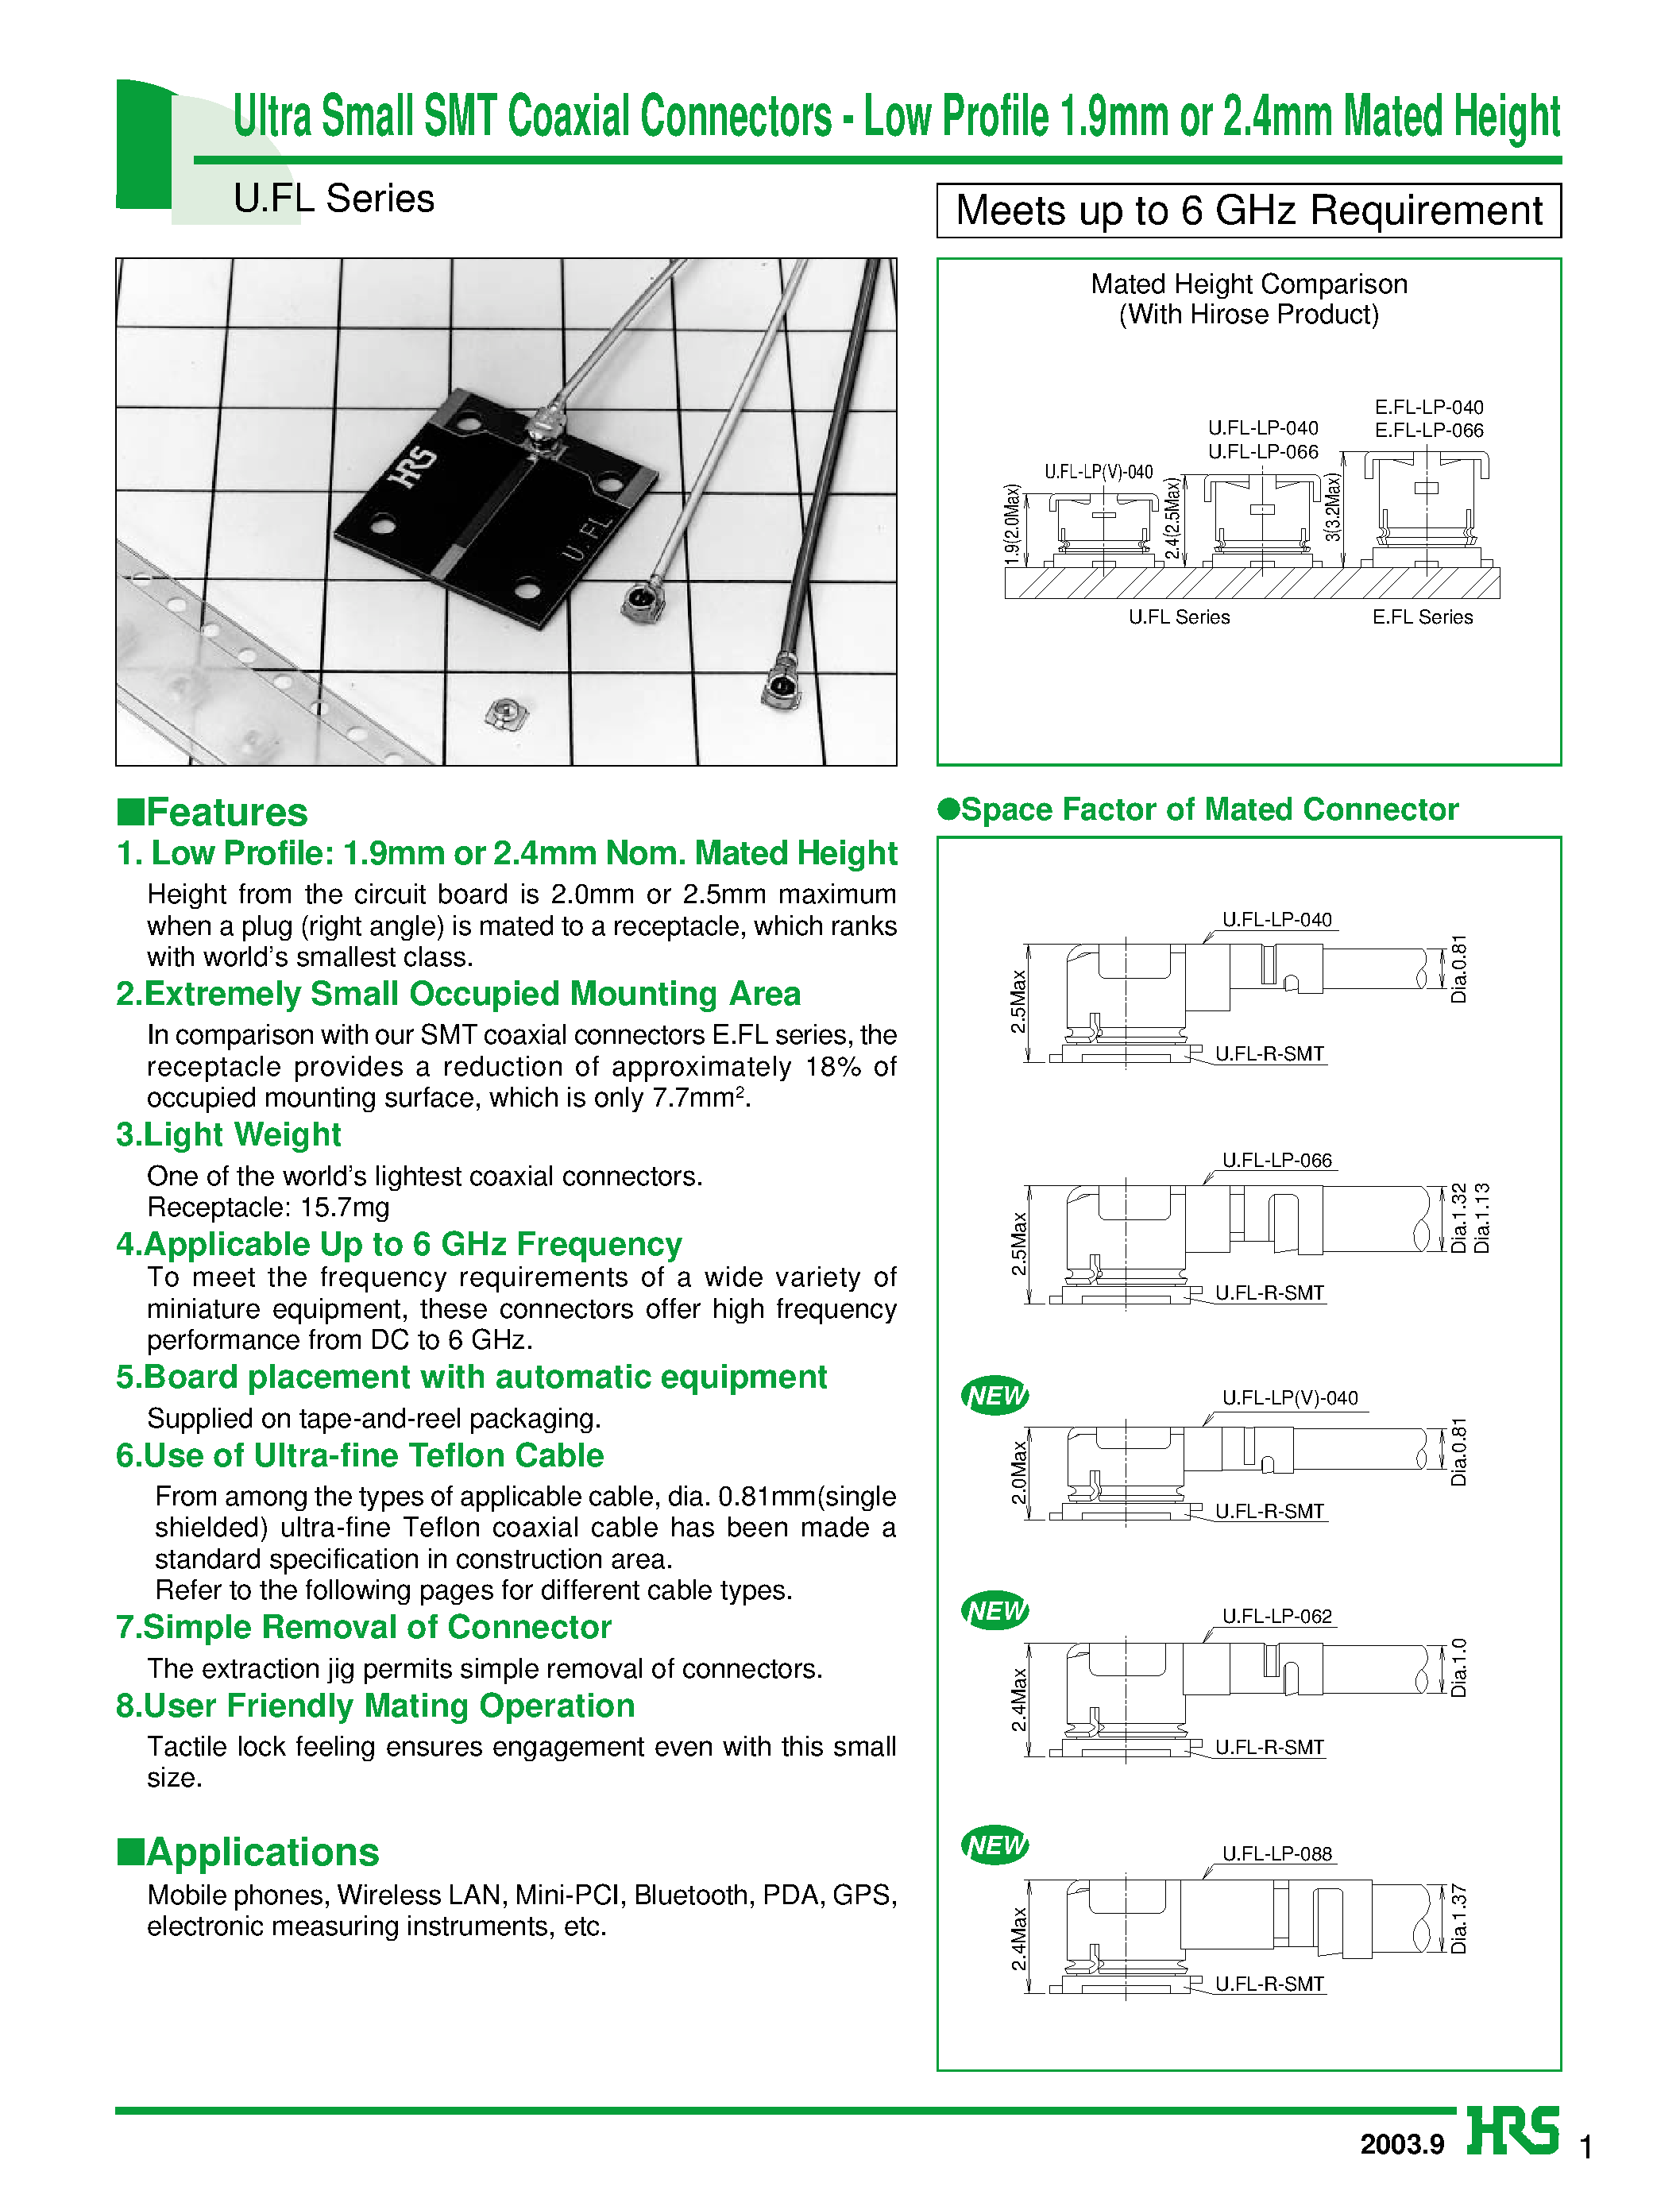 Datasheet HRMJ-U.FLP - Ultra Small SMT Coaxial Connectors - Low Profile 1.9mm or 2.4mm Mated Height page 1